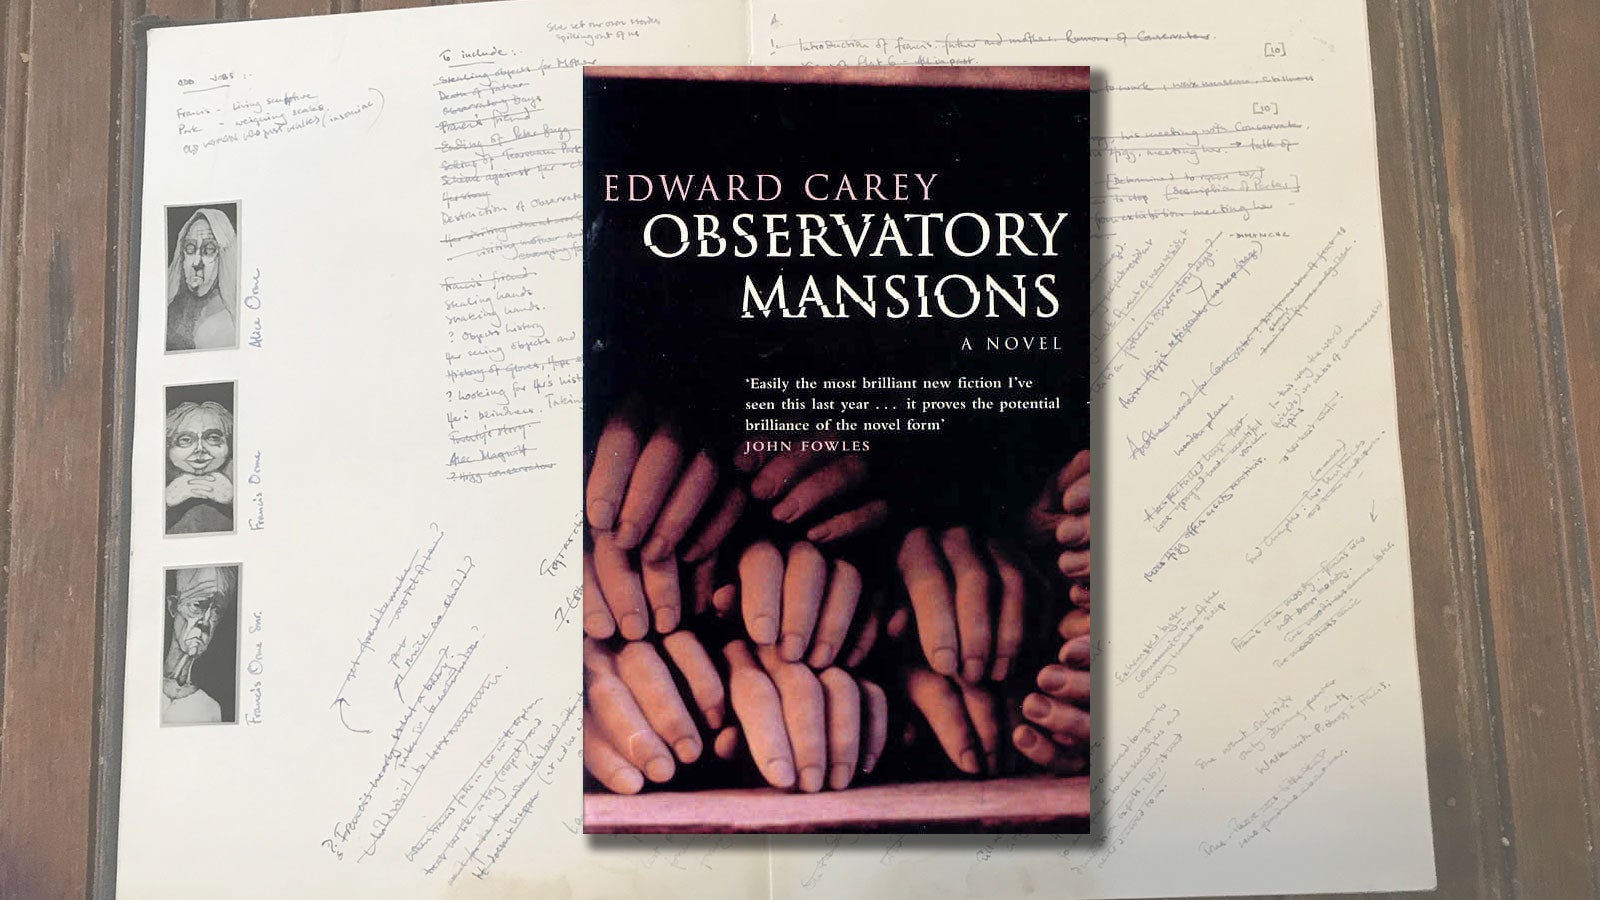 The book cover of Observatory Mansions against a background of Edward Carey's notes on the novel